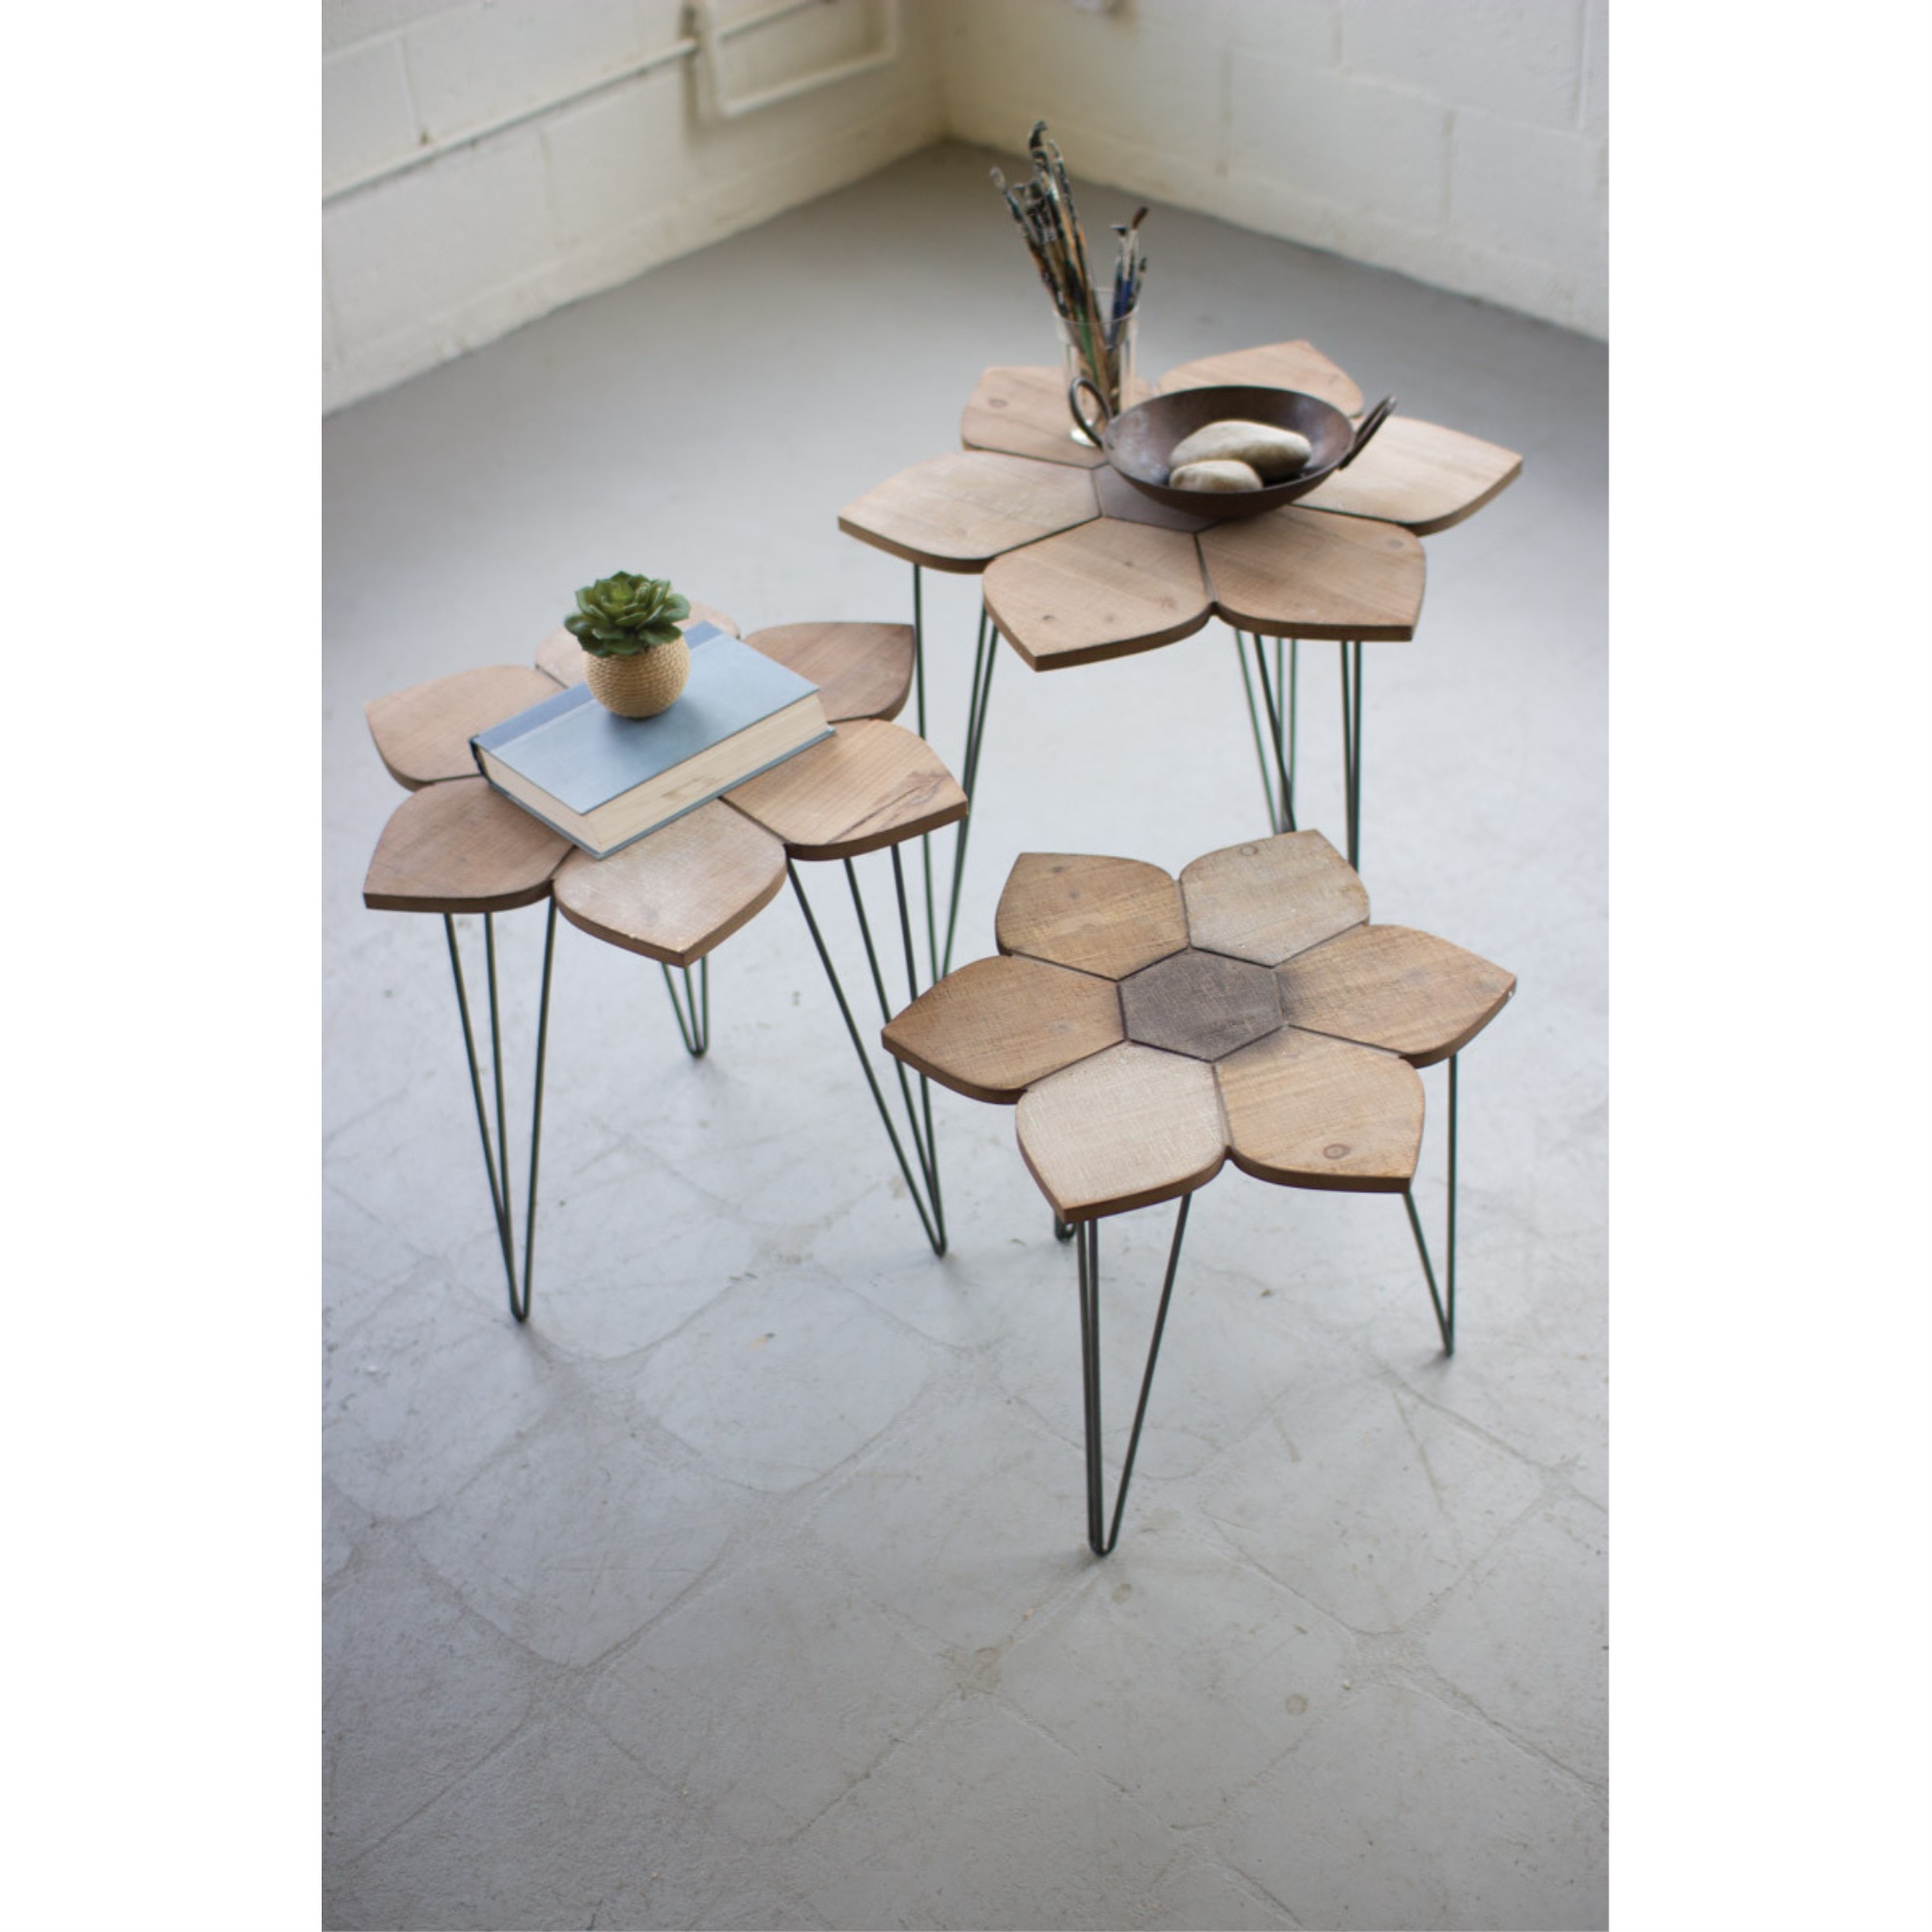 Set Of 3 Flower Side Tables With Wooden Tops Large 24"D X 22.5"T   Medium 22"D X 20"T   Small 19"D X 16.5"T